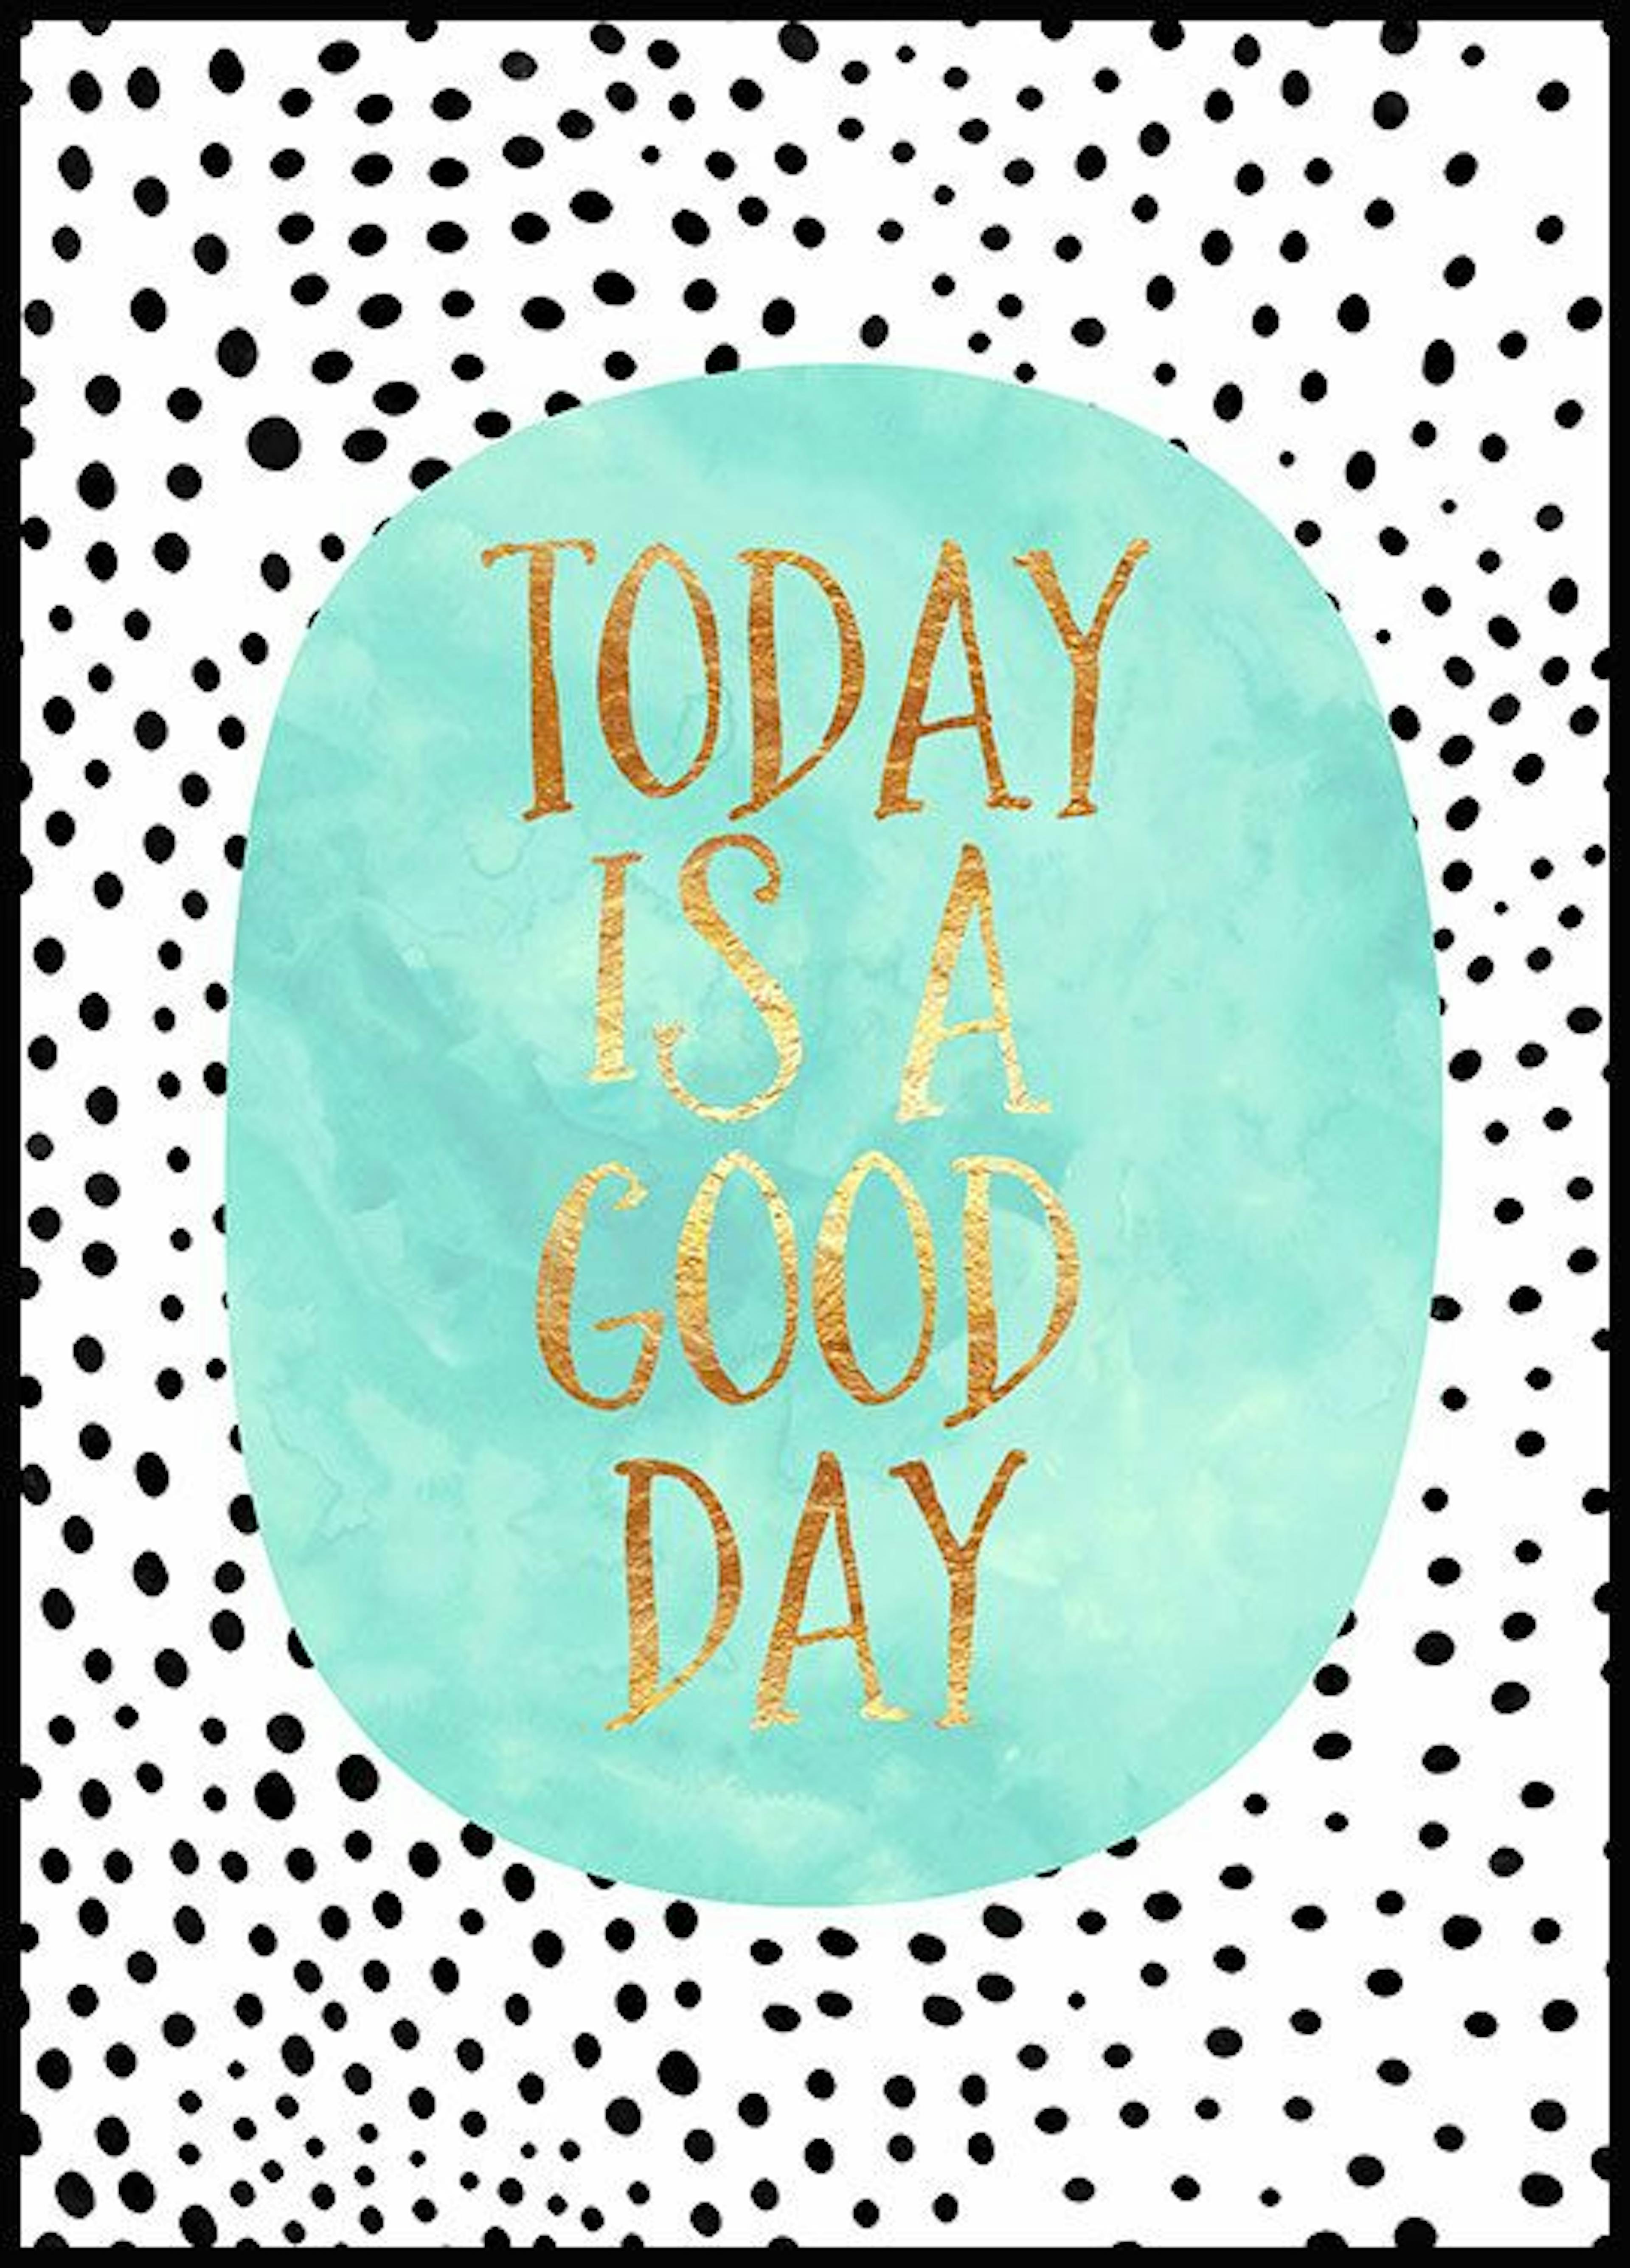 Today is a Good Day Affiche 0